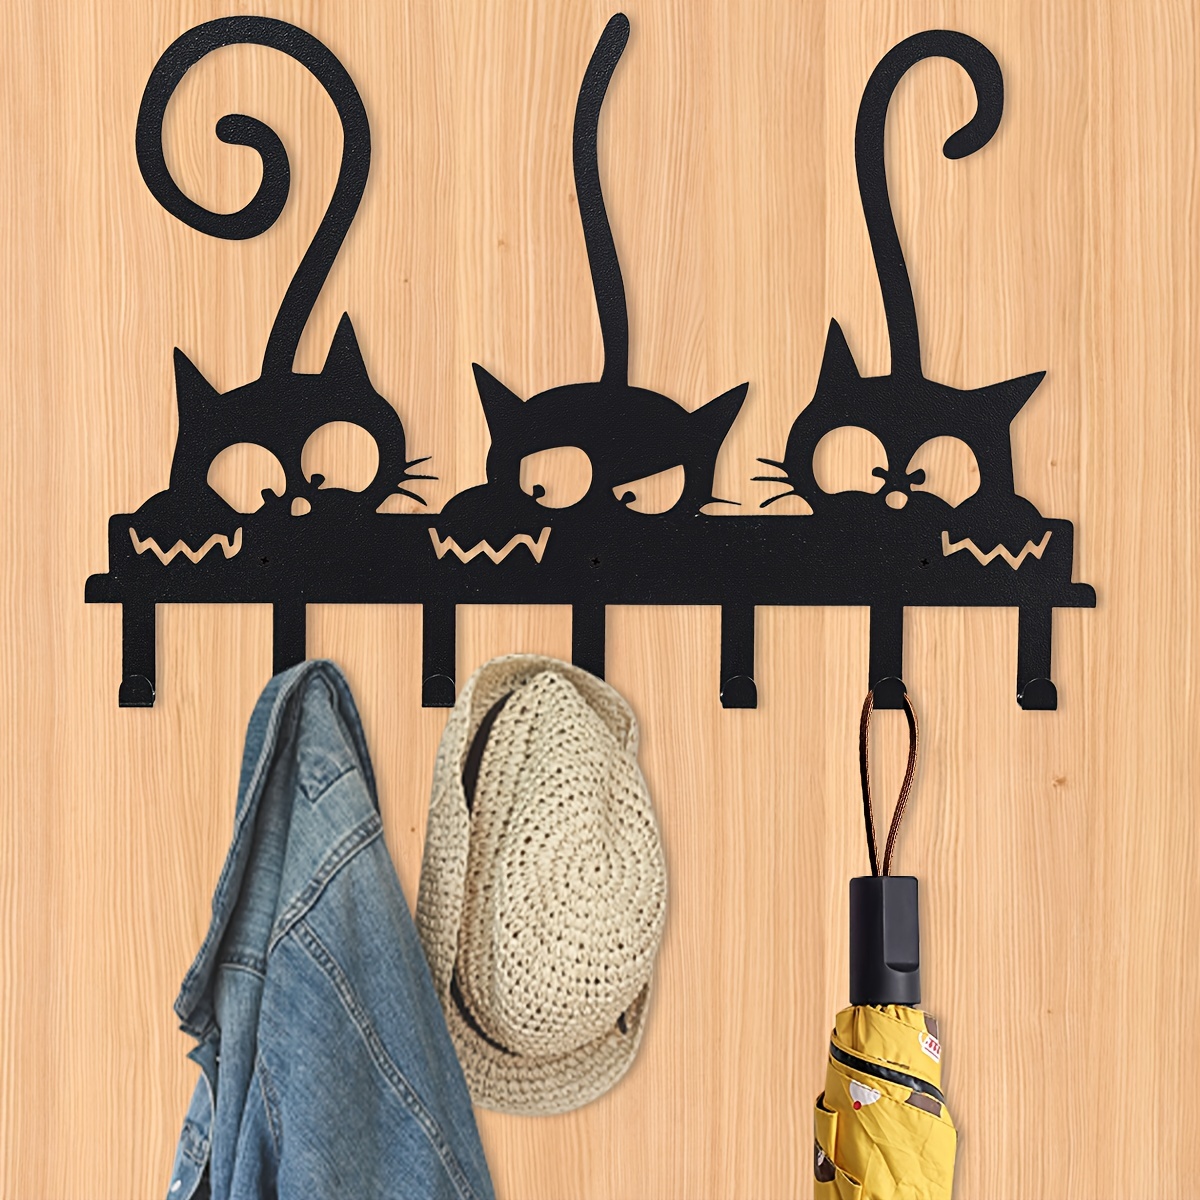 

1pc Decorative Cat Silhouette Key Holder For Wall With 7 Hooks, Key Hanger For Wall For Farmhouse-style Homes - Iron Wall Key Holder, Cats Key Rack For Wall 11.81" X 7.99